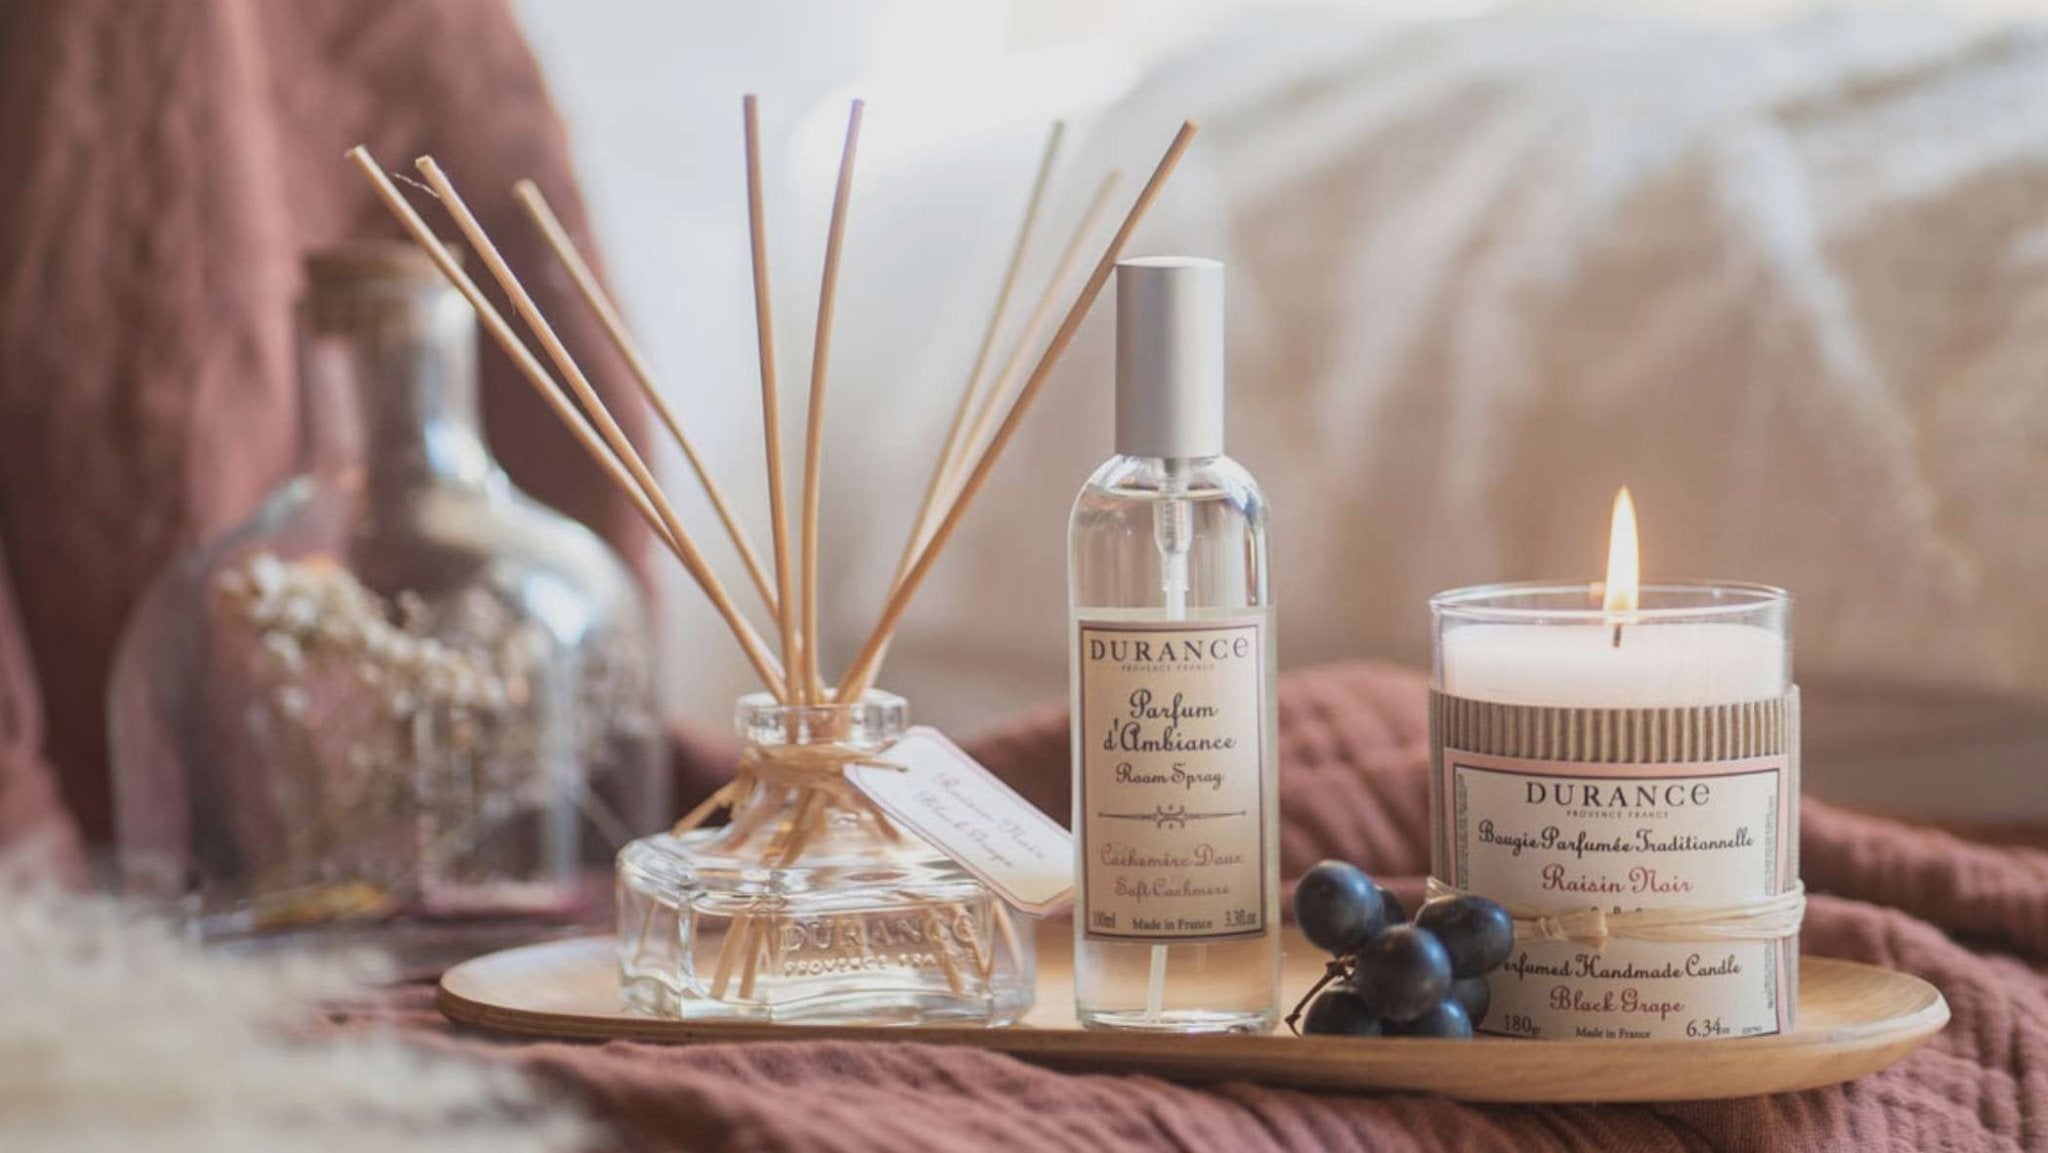 Winter wellness: Self-Care practices for body and mind during the cold season - French Beauty Co.